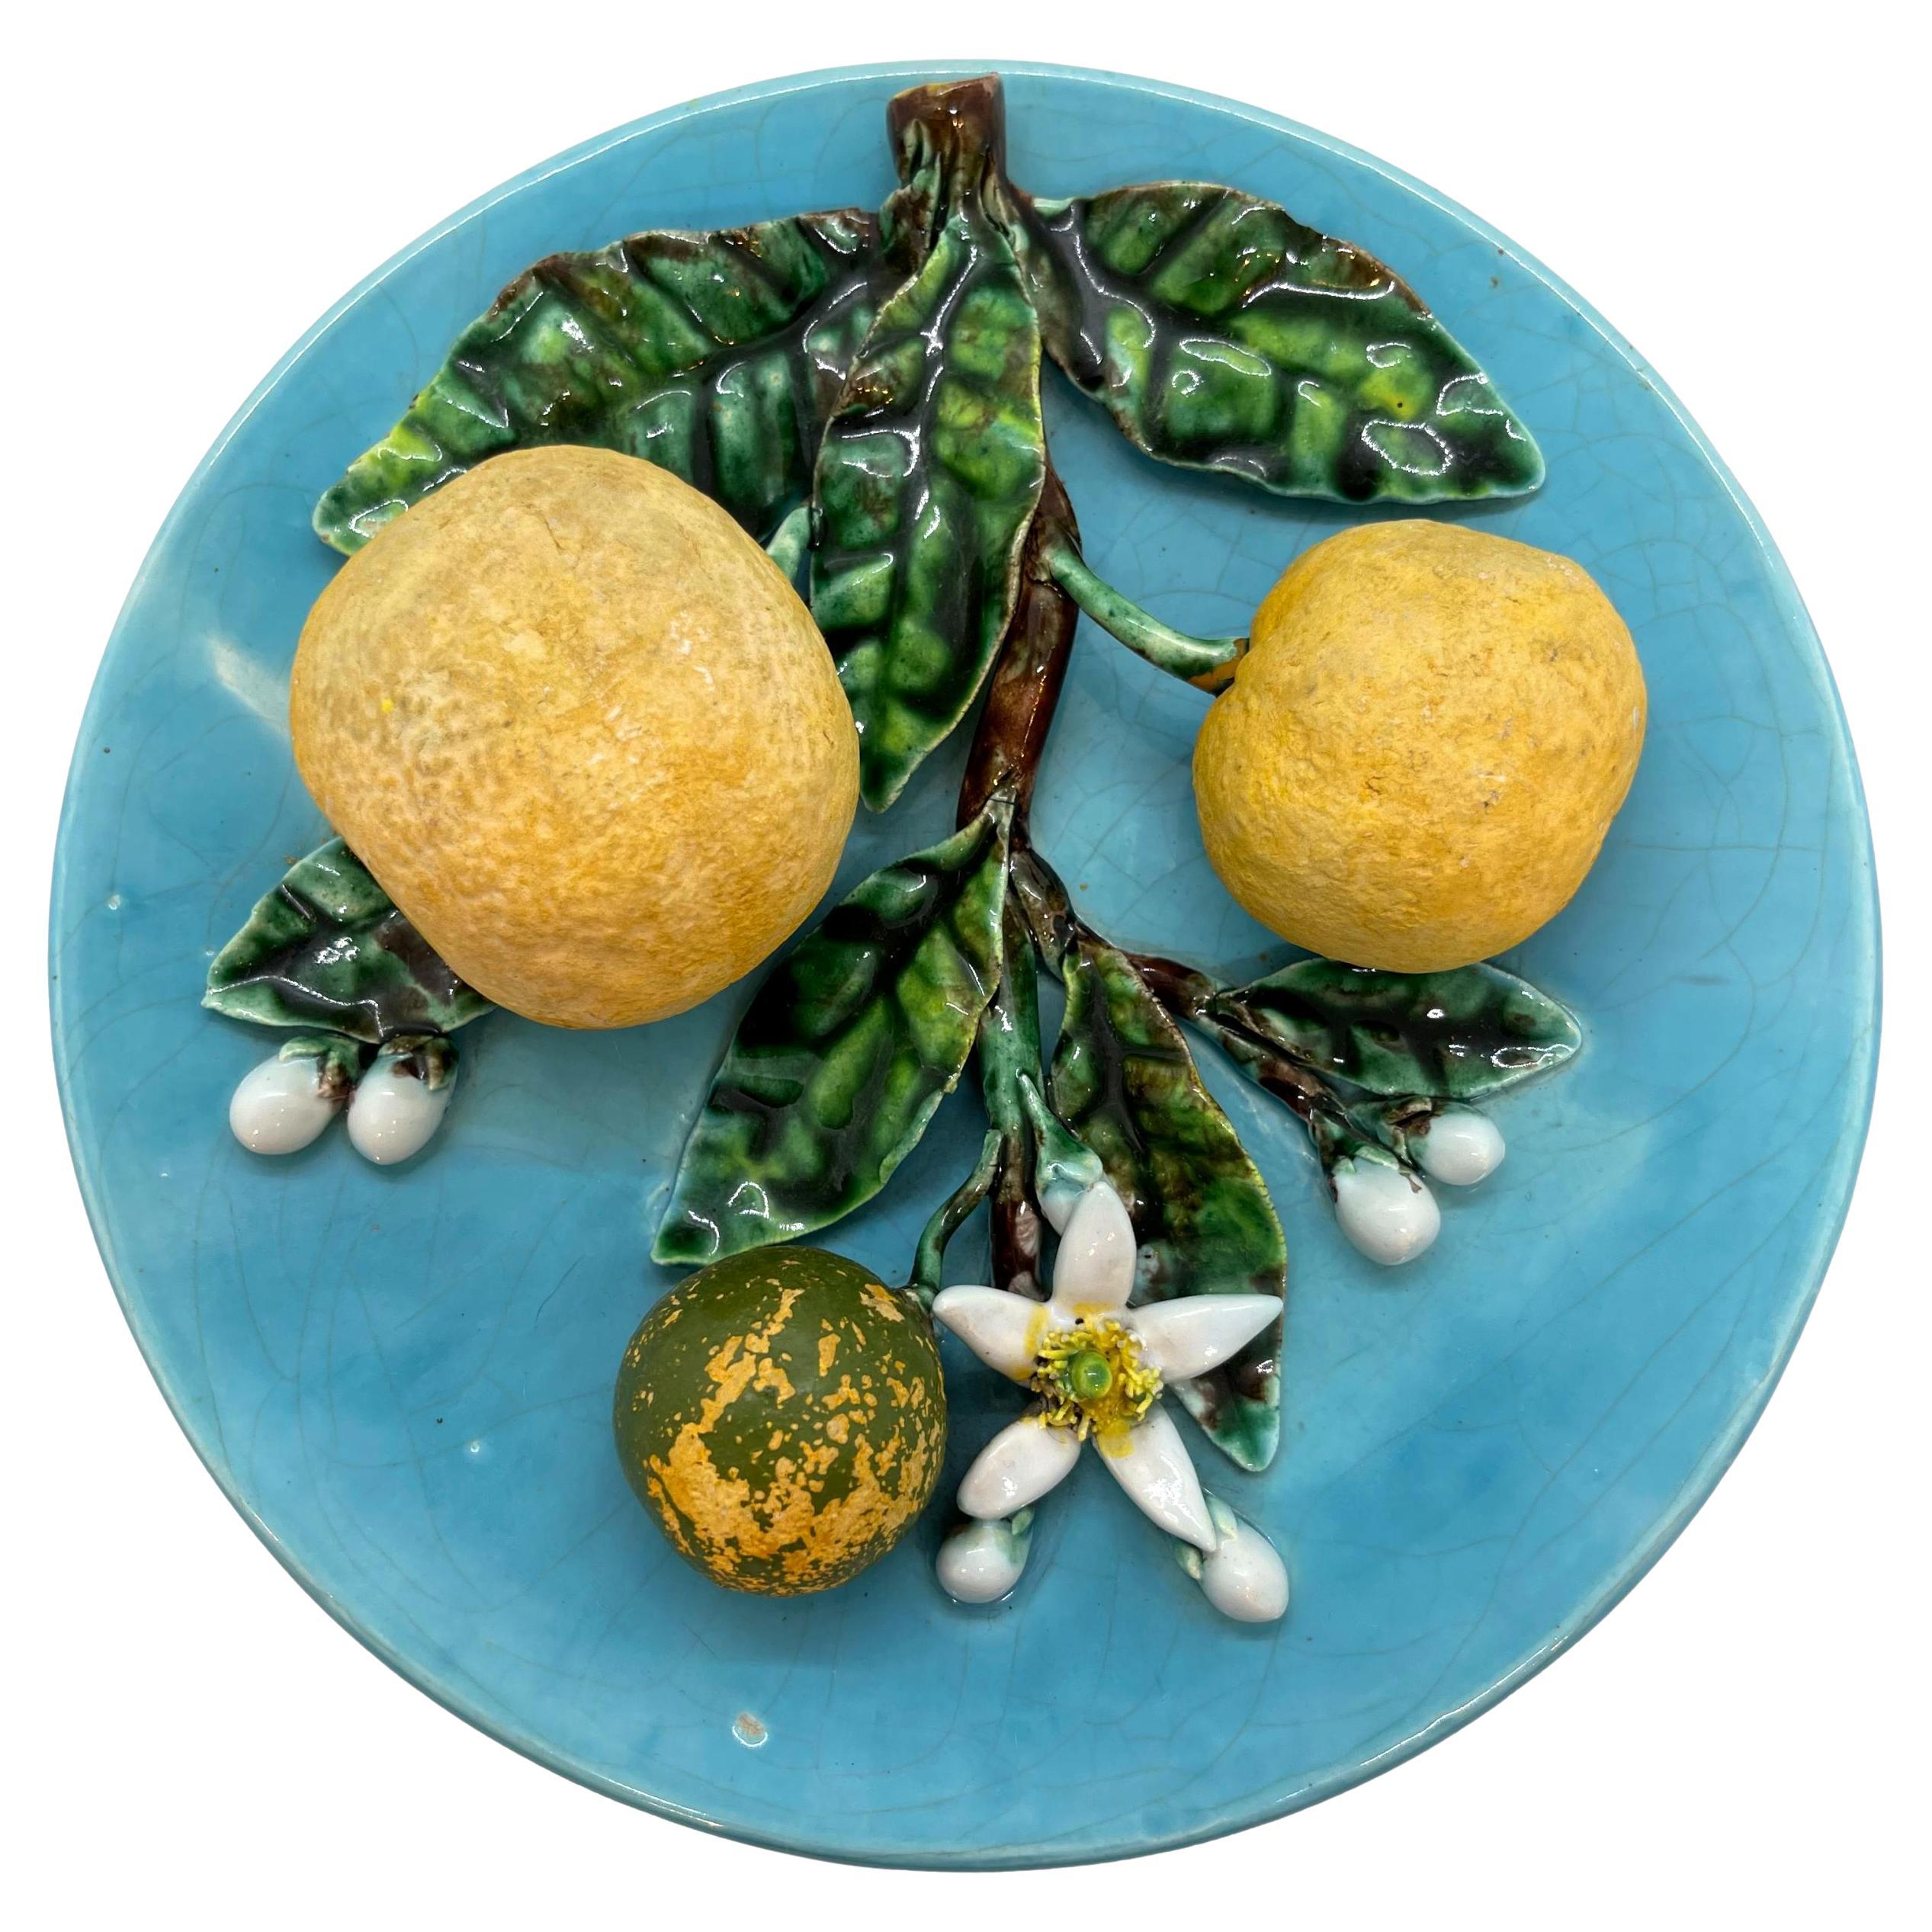 French Majolica Trompe L'oeil Wall Plaque with Oranges, Perret-Gentil, Menton